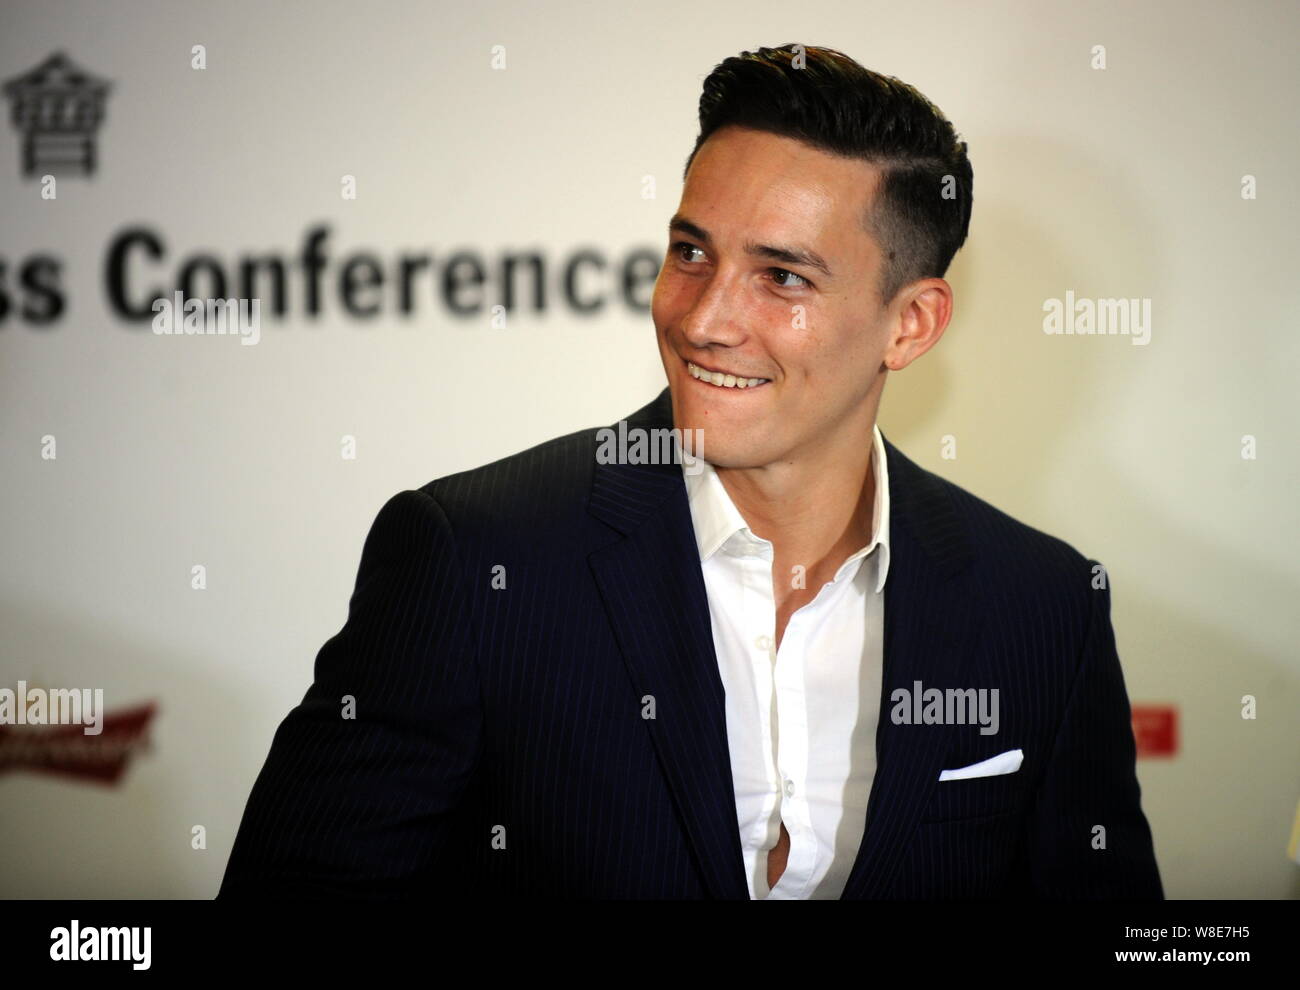 German gymnast Marcel Nguyen smiles during a press conference for the 2015 Porsche Carrera Cup Asia season in Hong Kong, China, 1 April 2015. Stock Photo